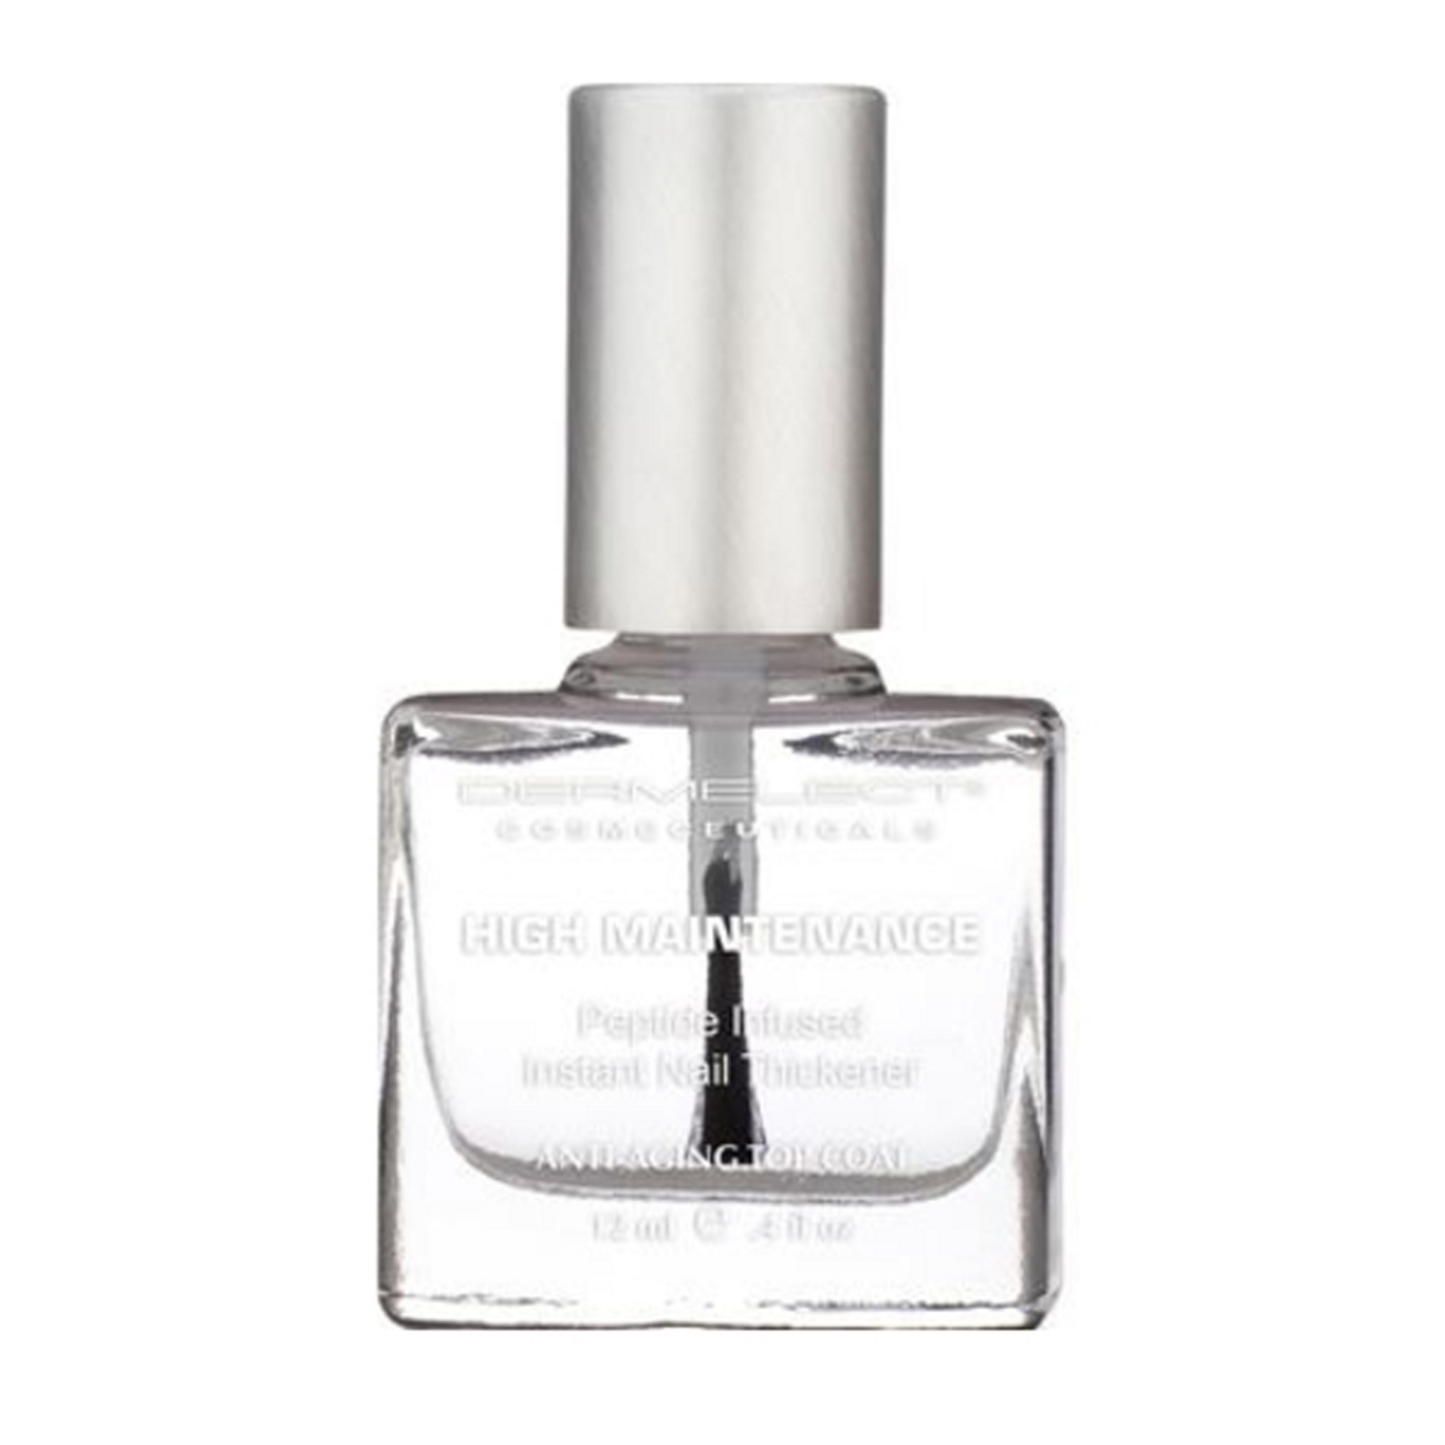 Dermelect Cosmeceuticals High Maintenance Instant Nail Thickener Top Coat